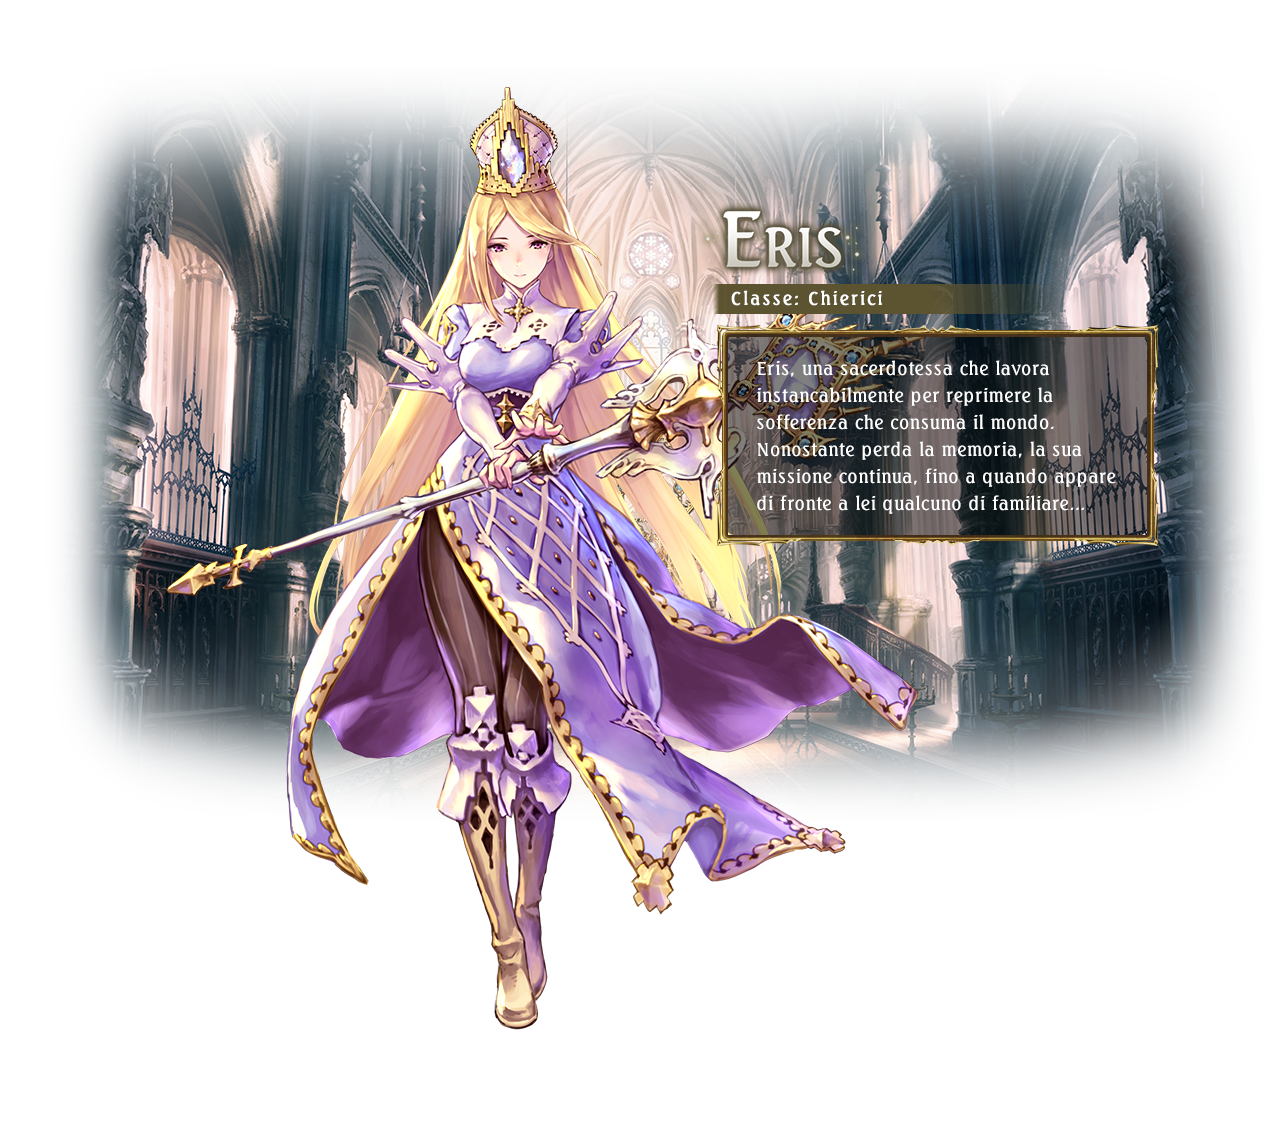 Eris / Class: Havencraft / Eris is a high priestess who works tirelessly to ease the suffering of humanity. She continues to serve despite having lost her memories when a familiar face appears.